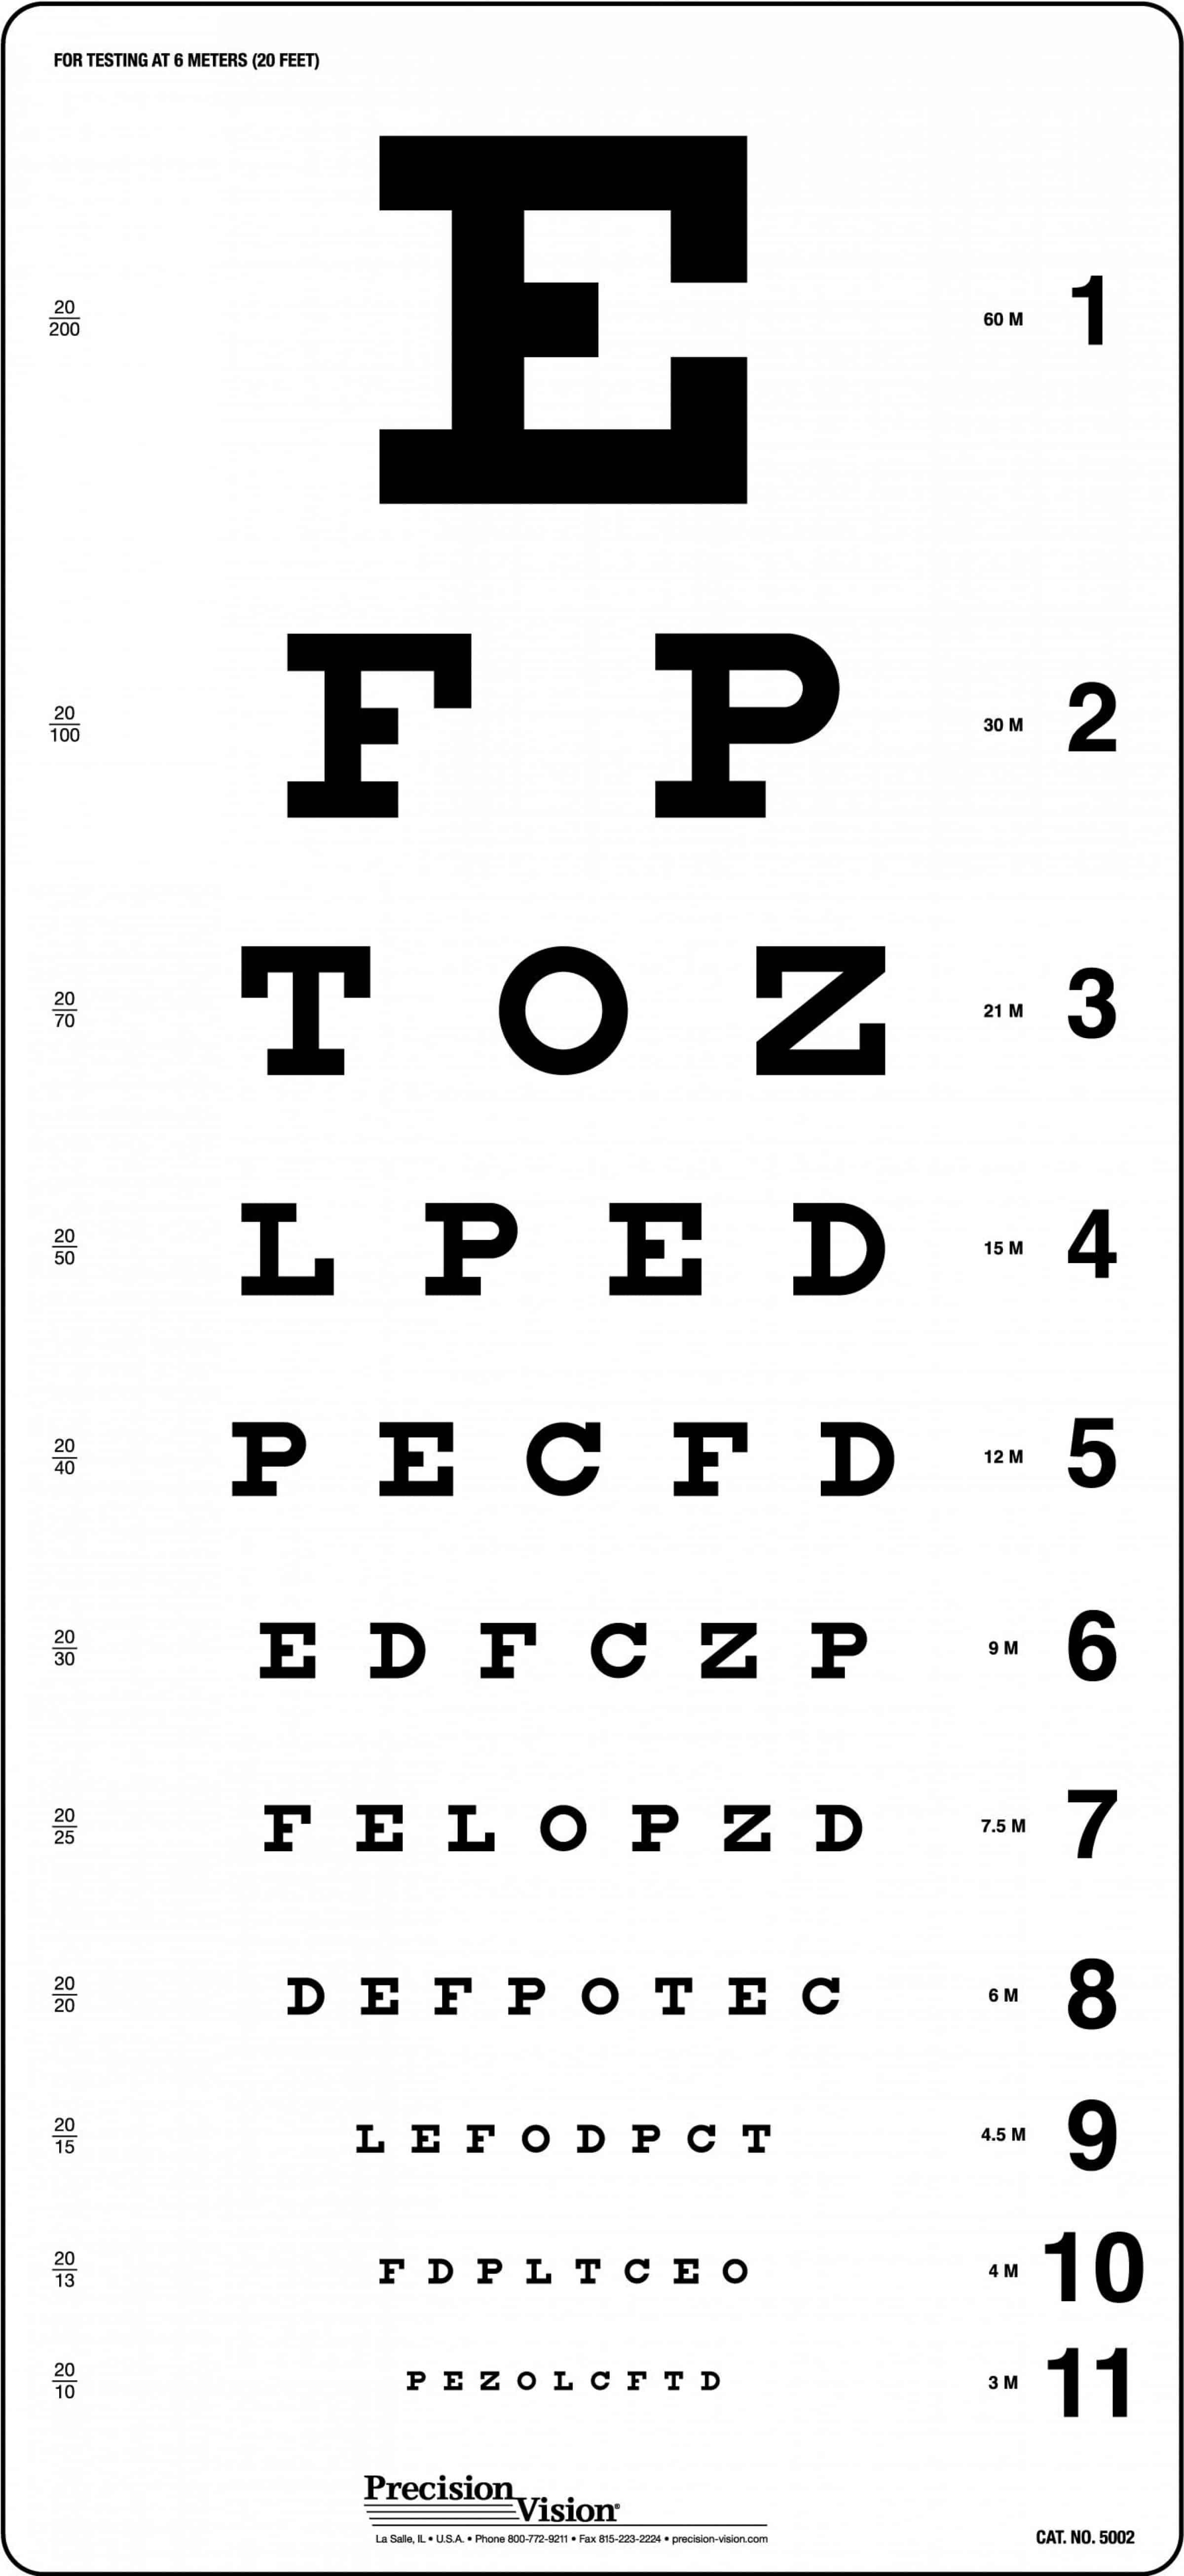 traditional-snellen-eye-chart-precision-vision